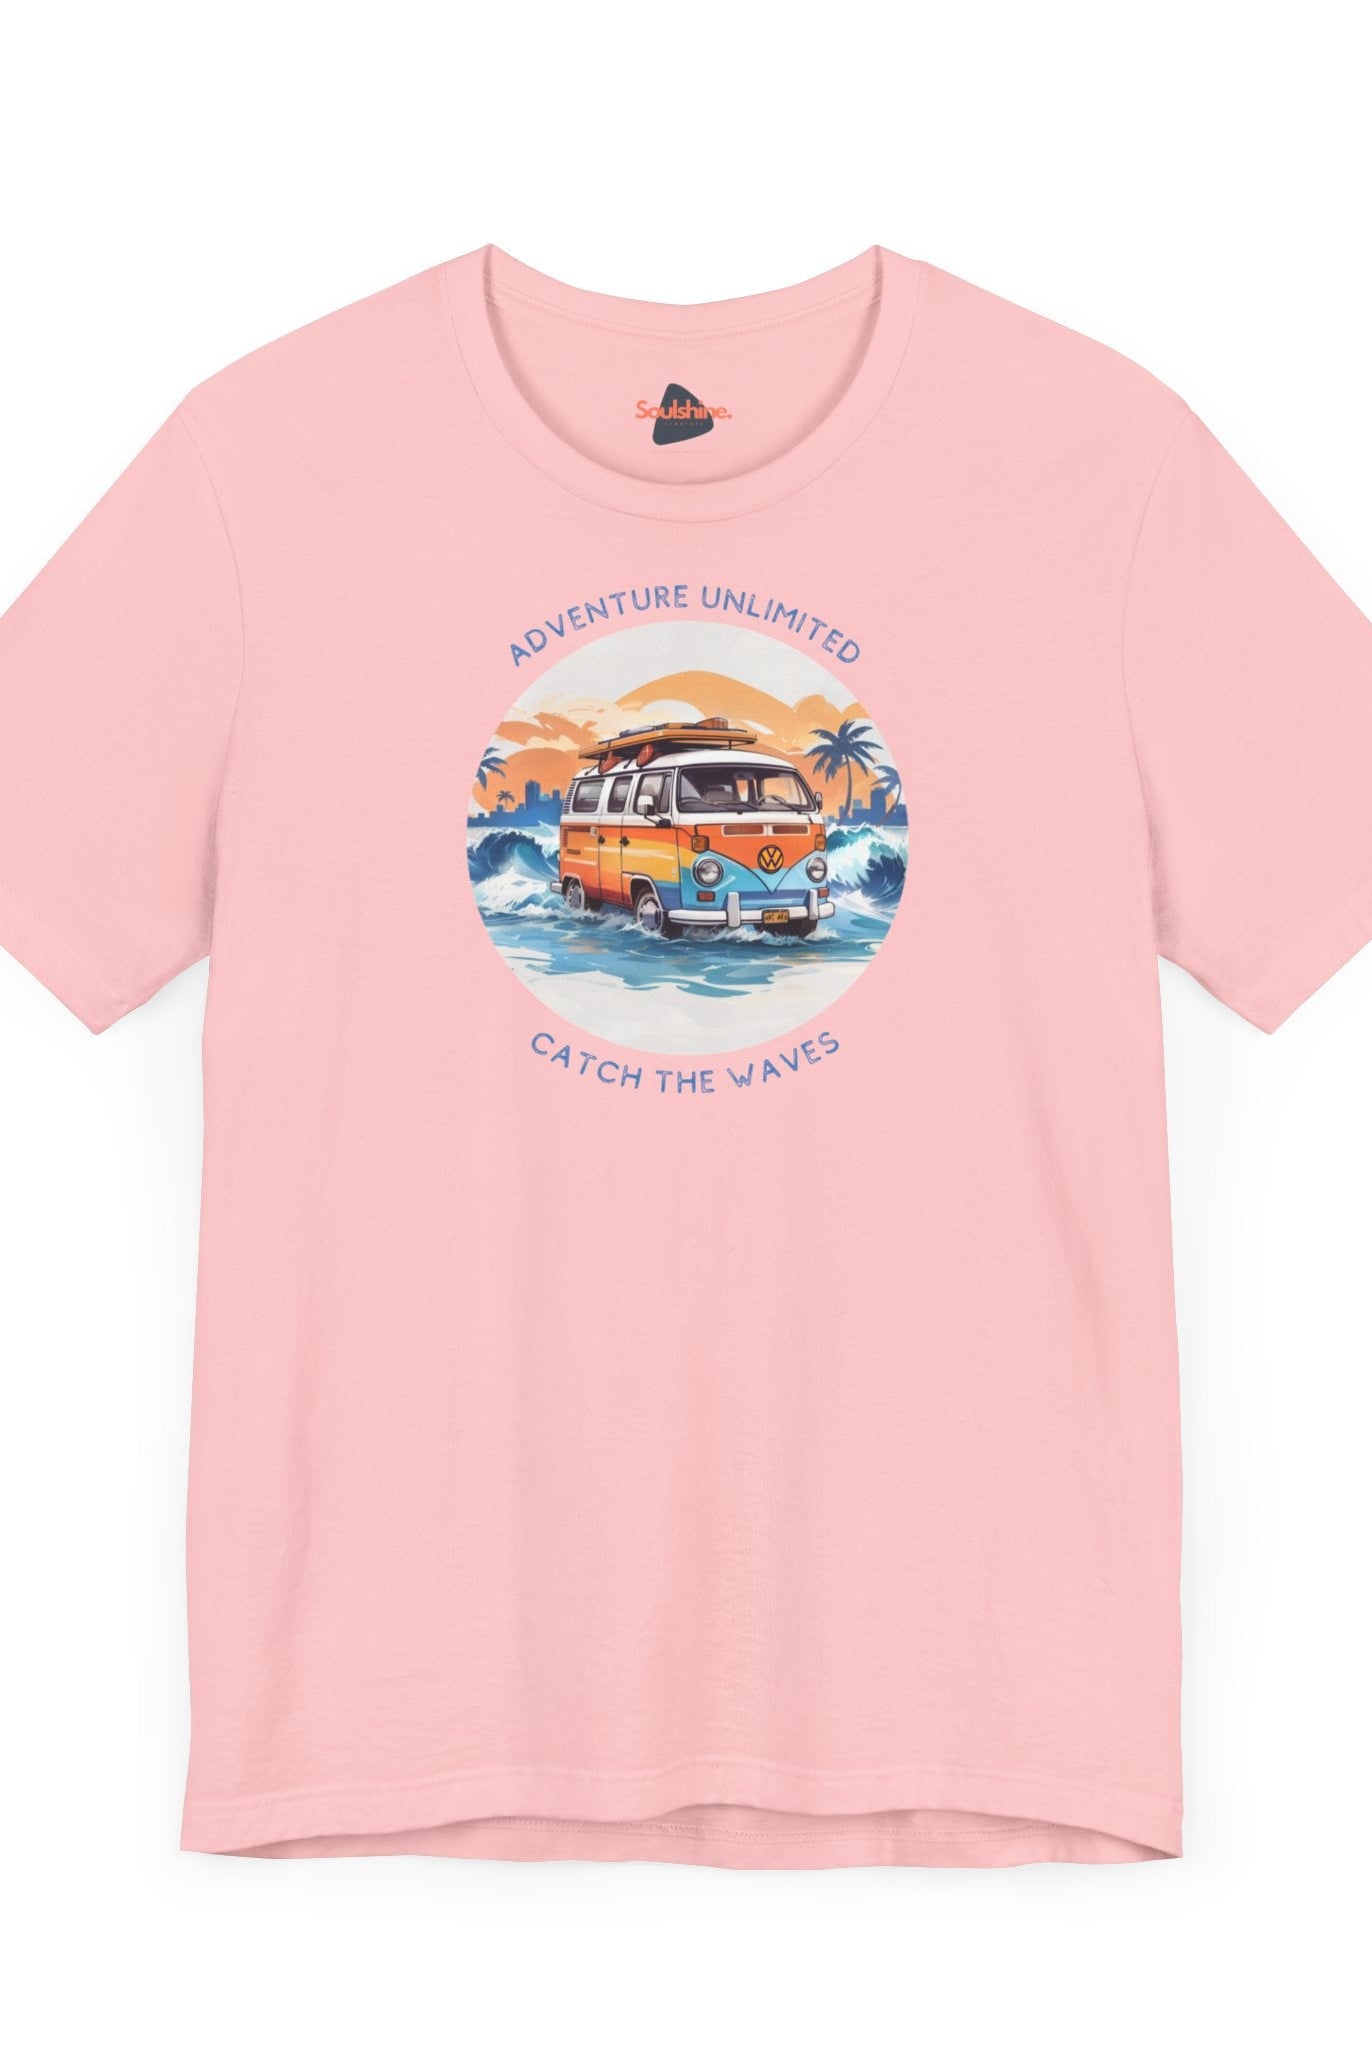 Adventure Unlimited Surfing T-Shirt featuring van and surfboard design - printed direct-to-garment on pink Bella & Canvas tee